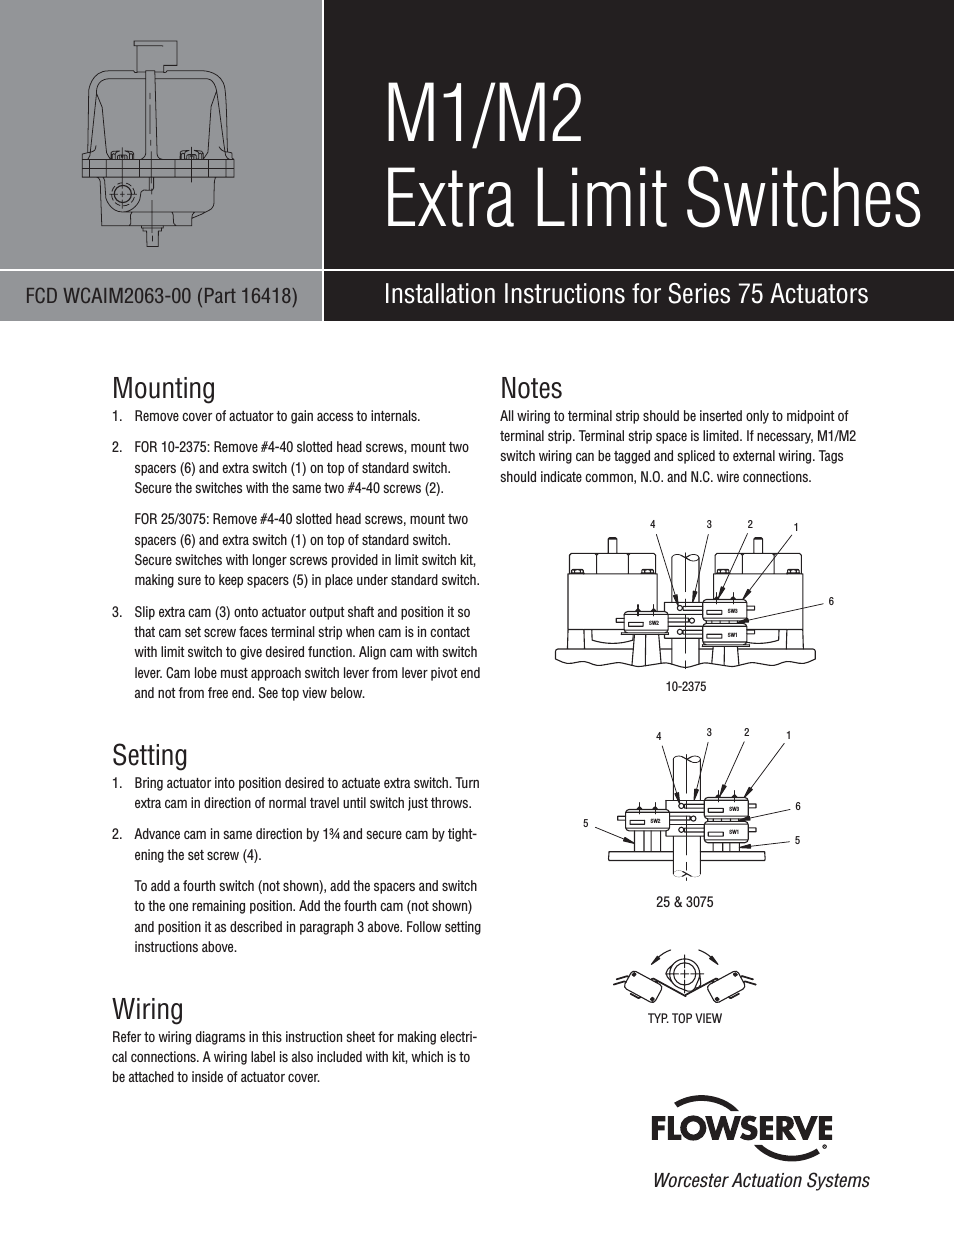 M2 Extra Limit Switches